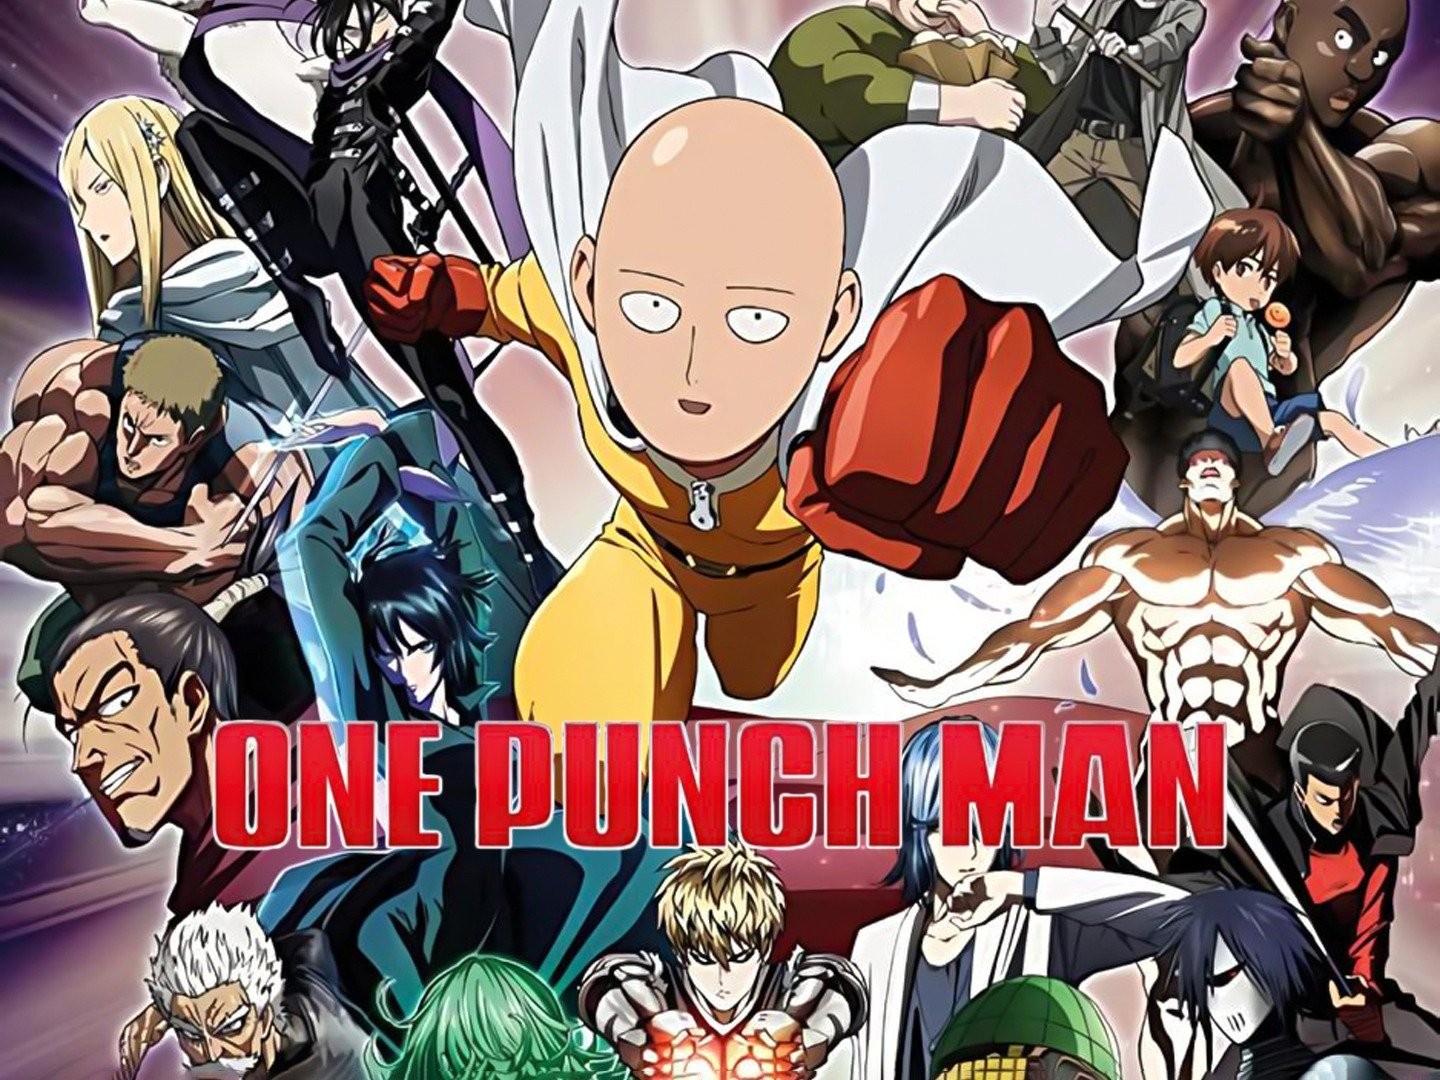 One Punch Man Season 2: Where To Watch Every Episode